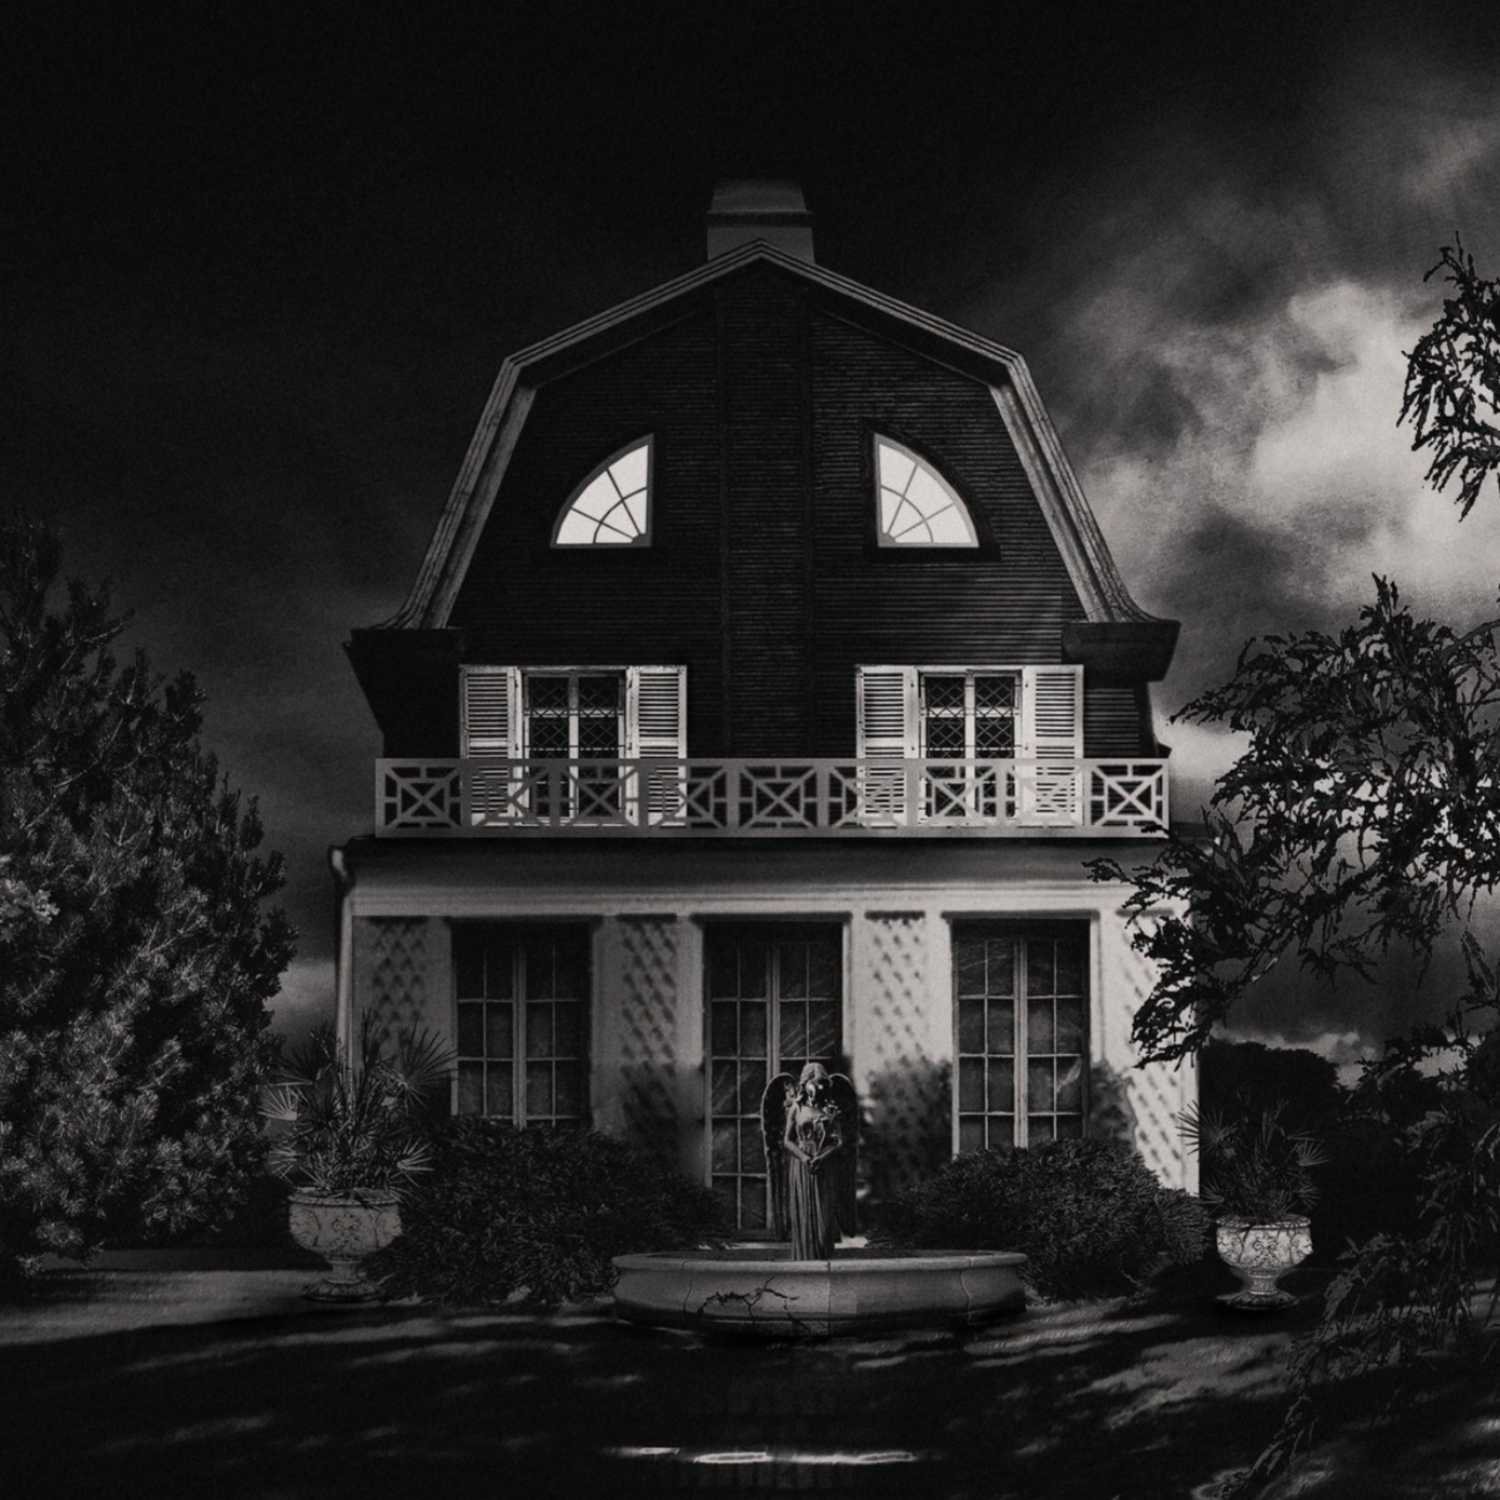 TRUE STORY BEHIND The Amityville Horror- What Really Happened?